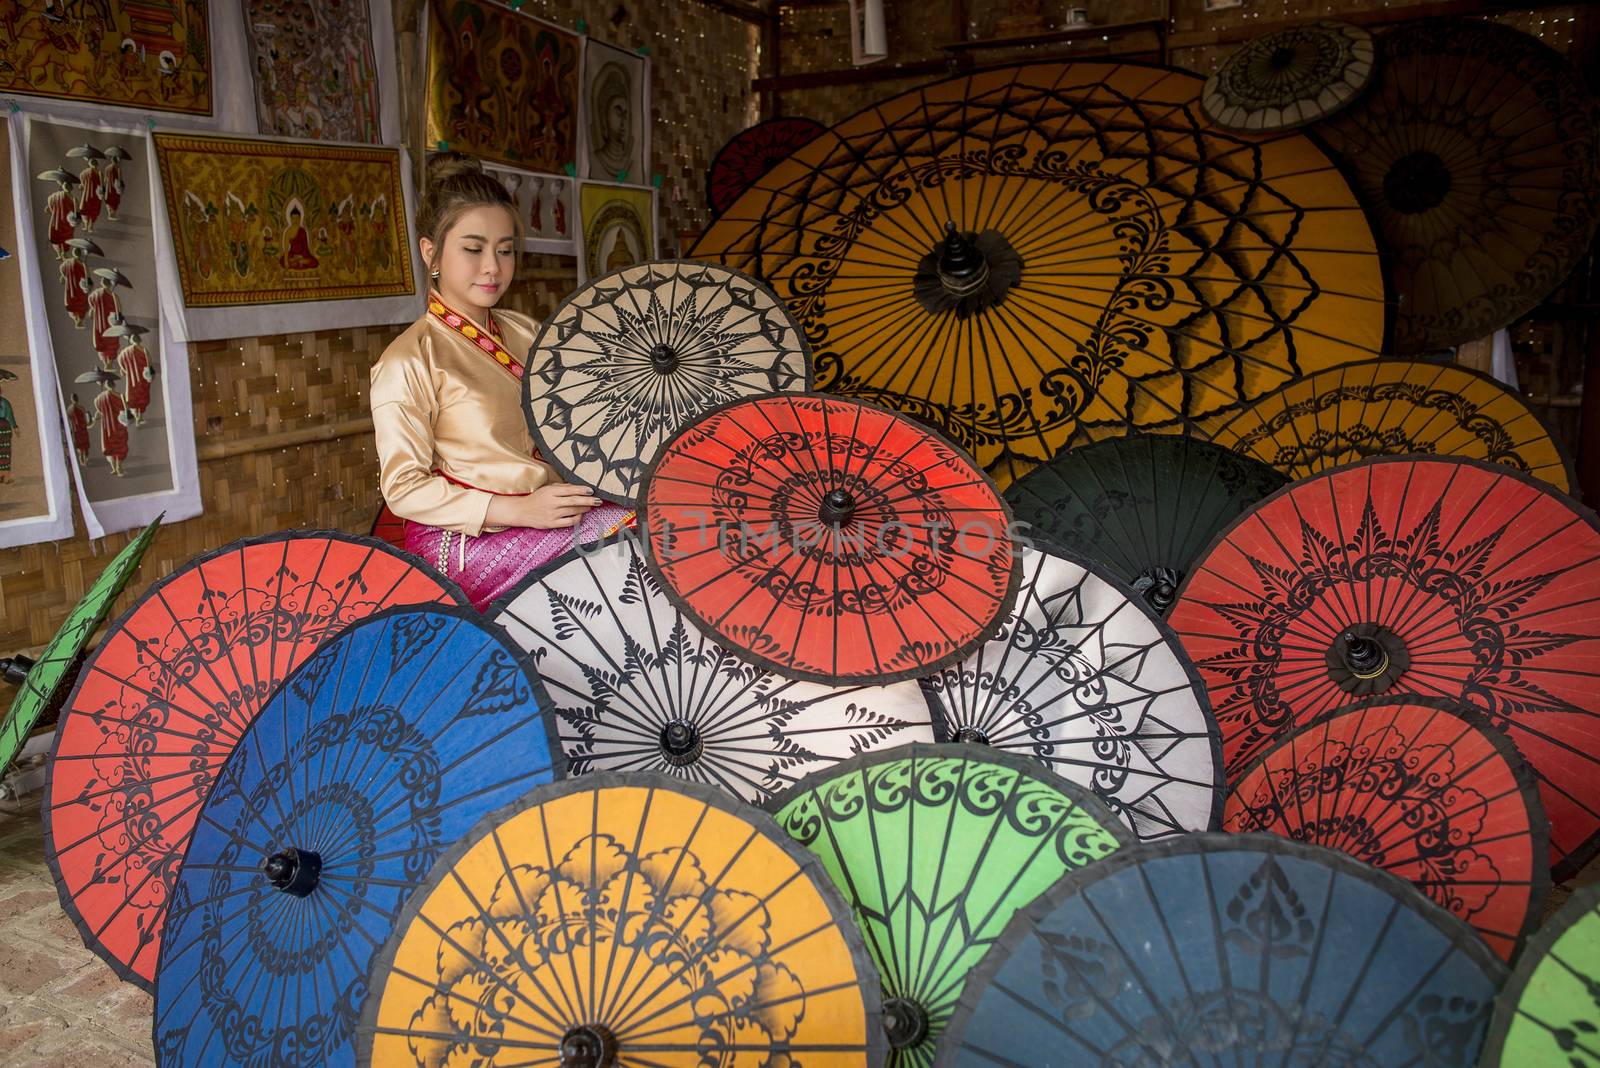 Asian Women in Colorful Umbrella Souvenier Shop at Bagan, Mandal by chanwity